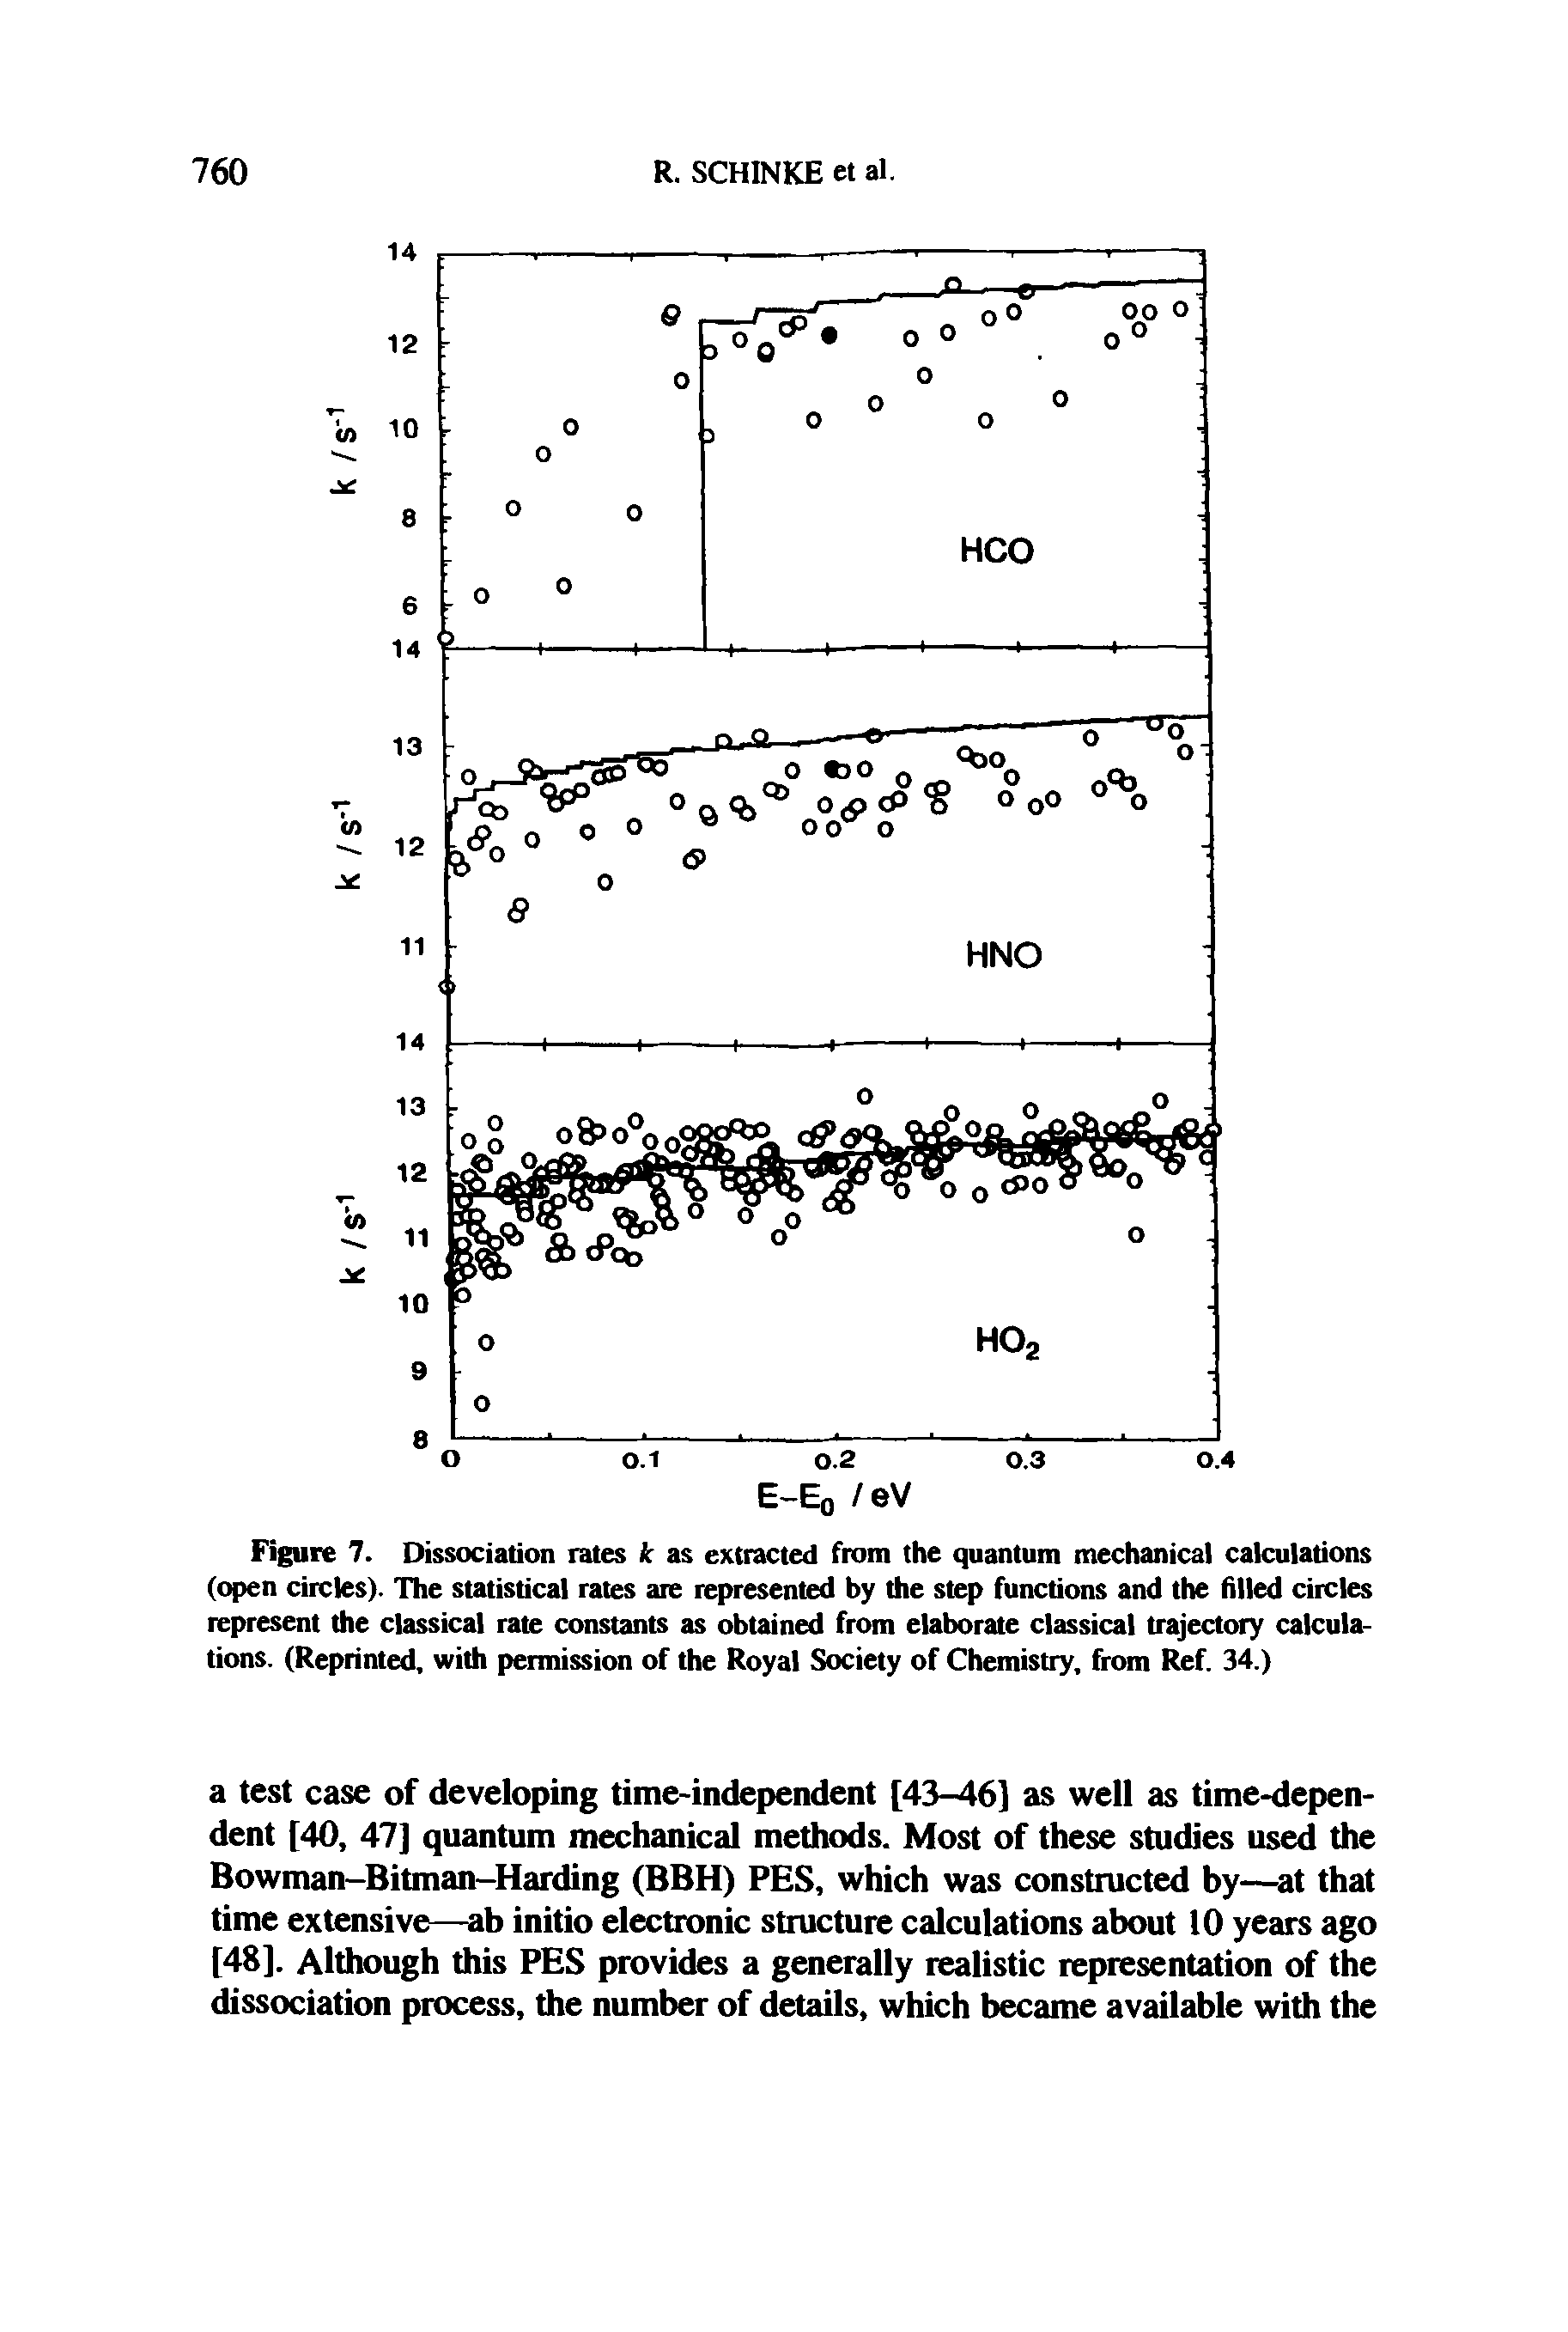 Figure 7. Dissociation rates k as extracted from the quantum mechanical calculations (open circles). The statistical rates are represented by the step functions and the filled circles represent the classical rate constants as obtained from elaborate classical trajectory calculations. (Reprinted, with permission of the Royal Society of Chemistry, from Ref. 34.)...